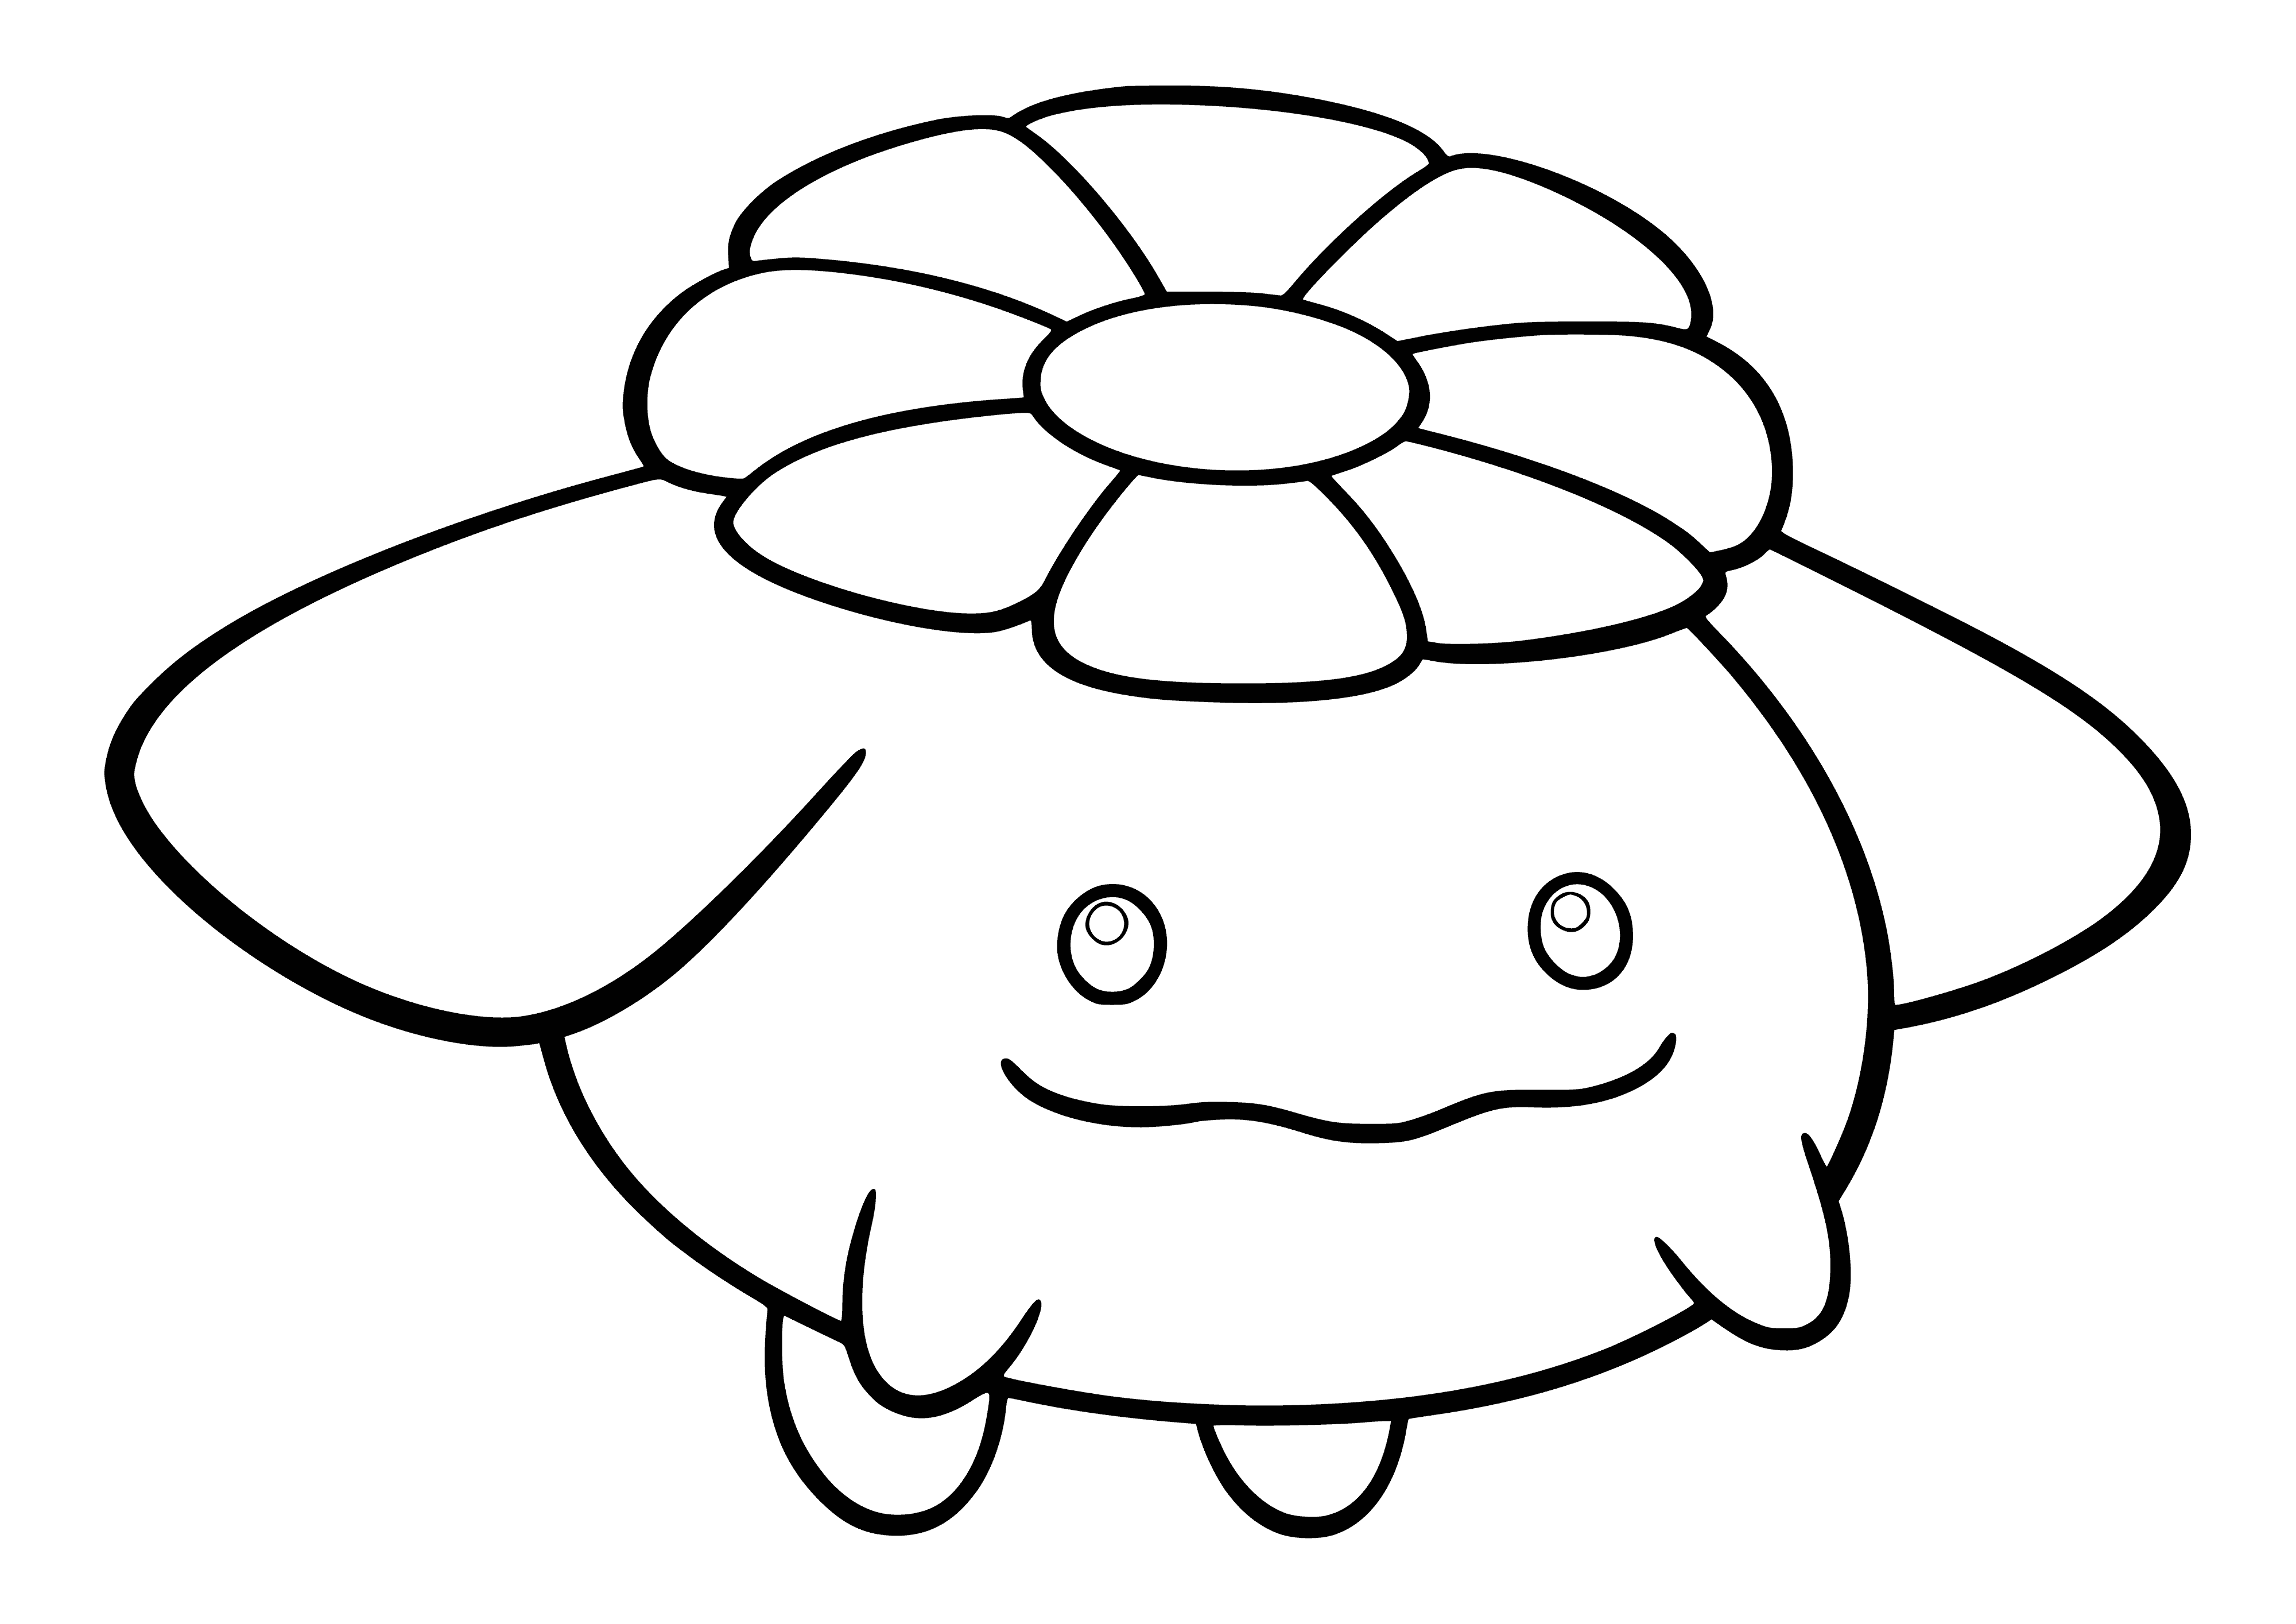 coloring page: A small, round, blue Pokémon with big eyes, white fur and a long, black tail tipped with fur.